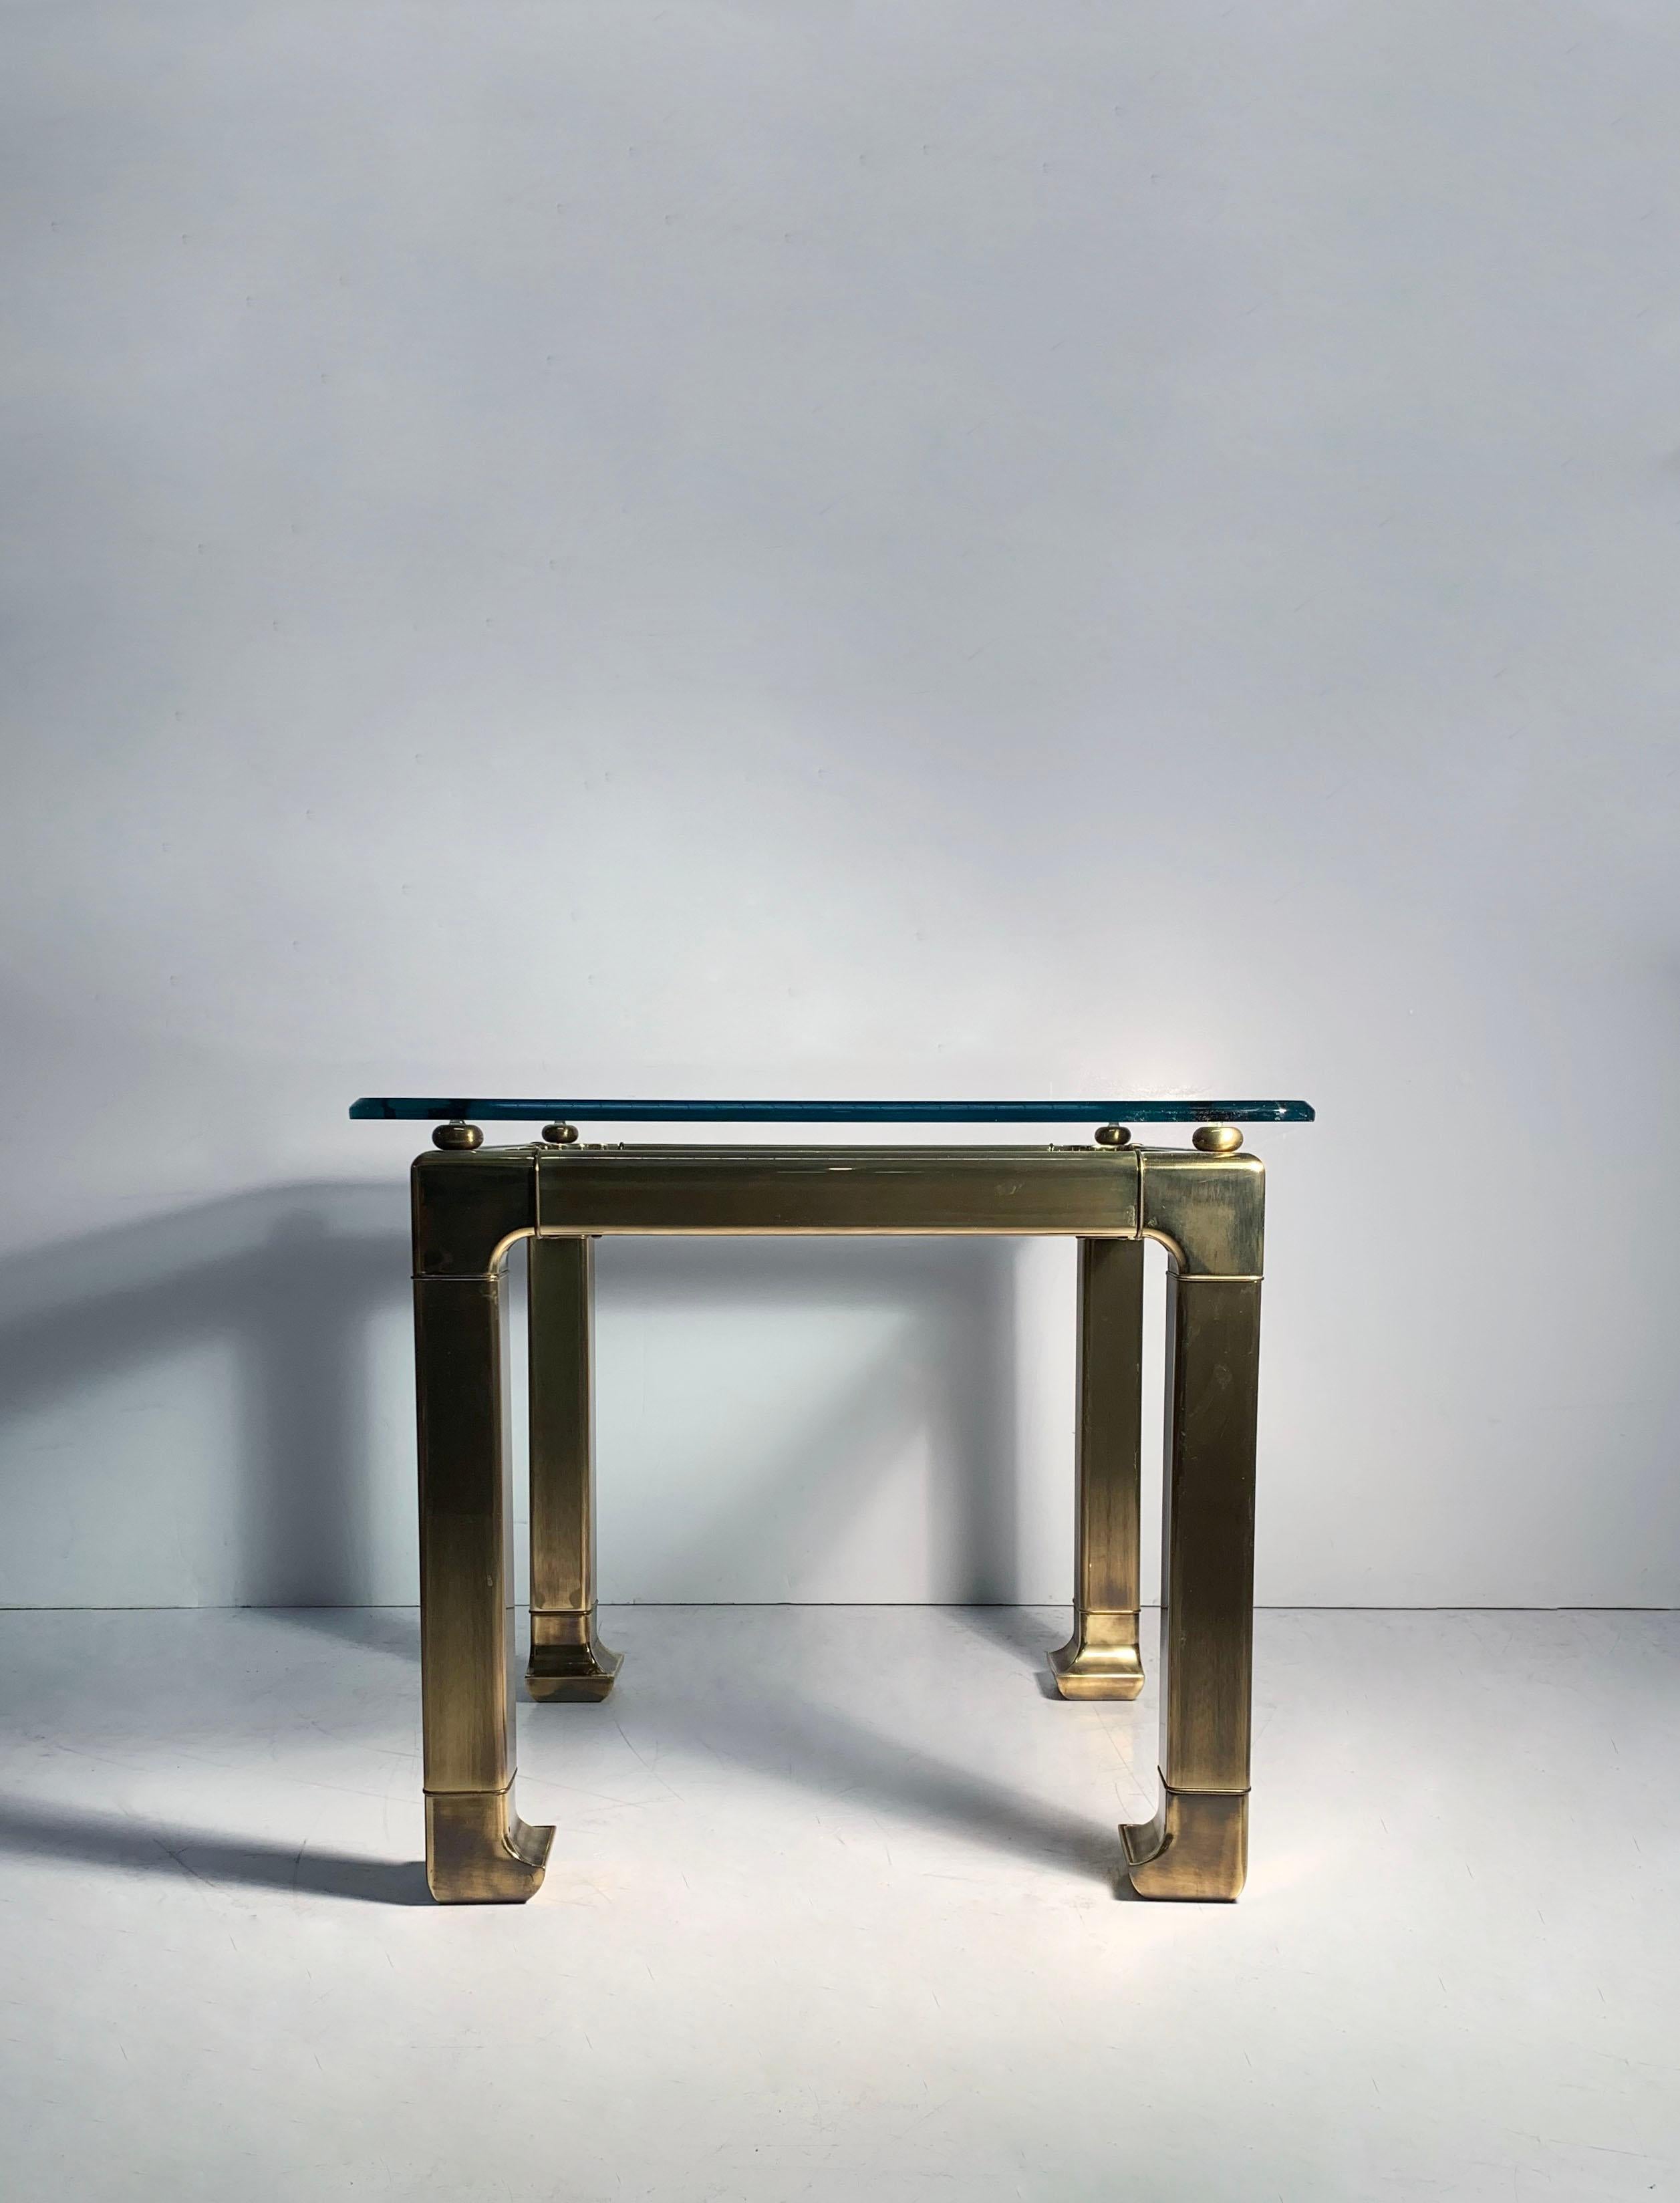 Mastercraft pair of brass chinoiserie modern end / side tables
Exceptional craftsmanship on these high end side tables by Mastercraft. Vintage and in beautiful condition for their age.

Dims are of the Glass 28